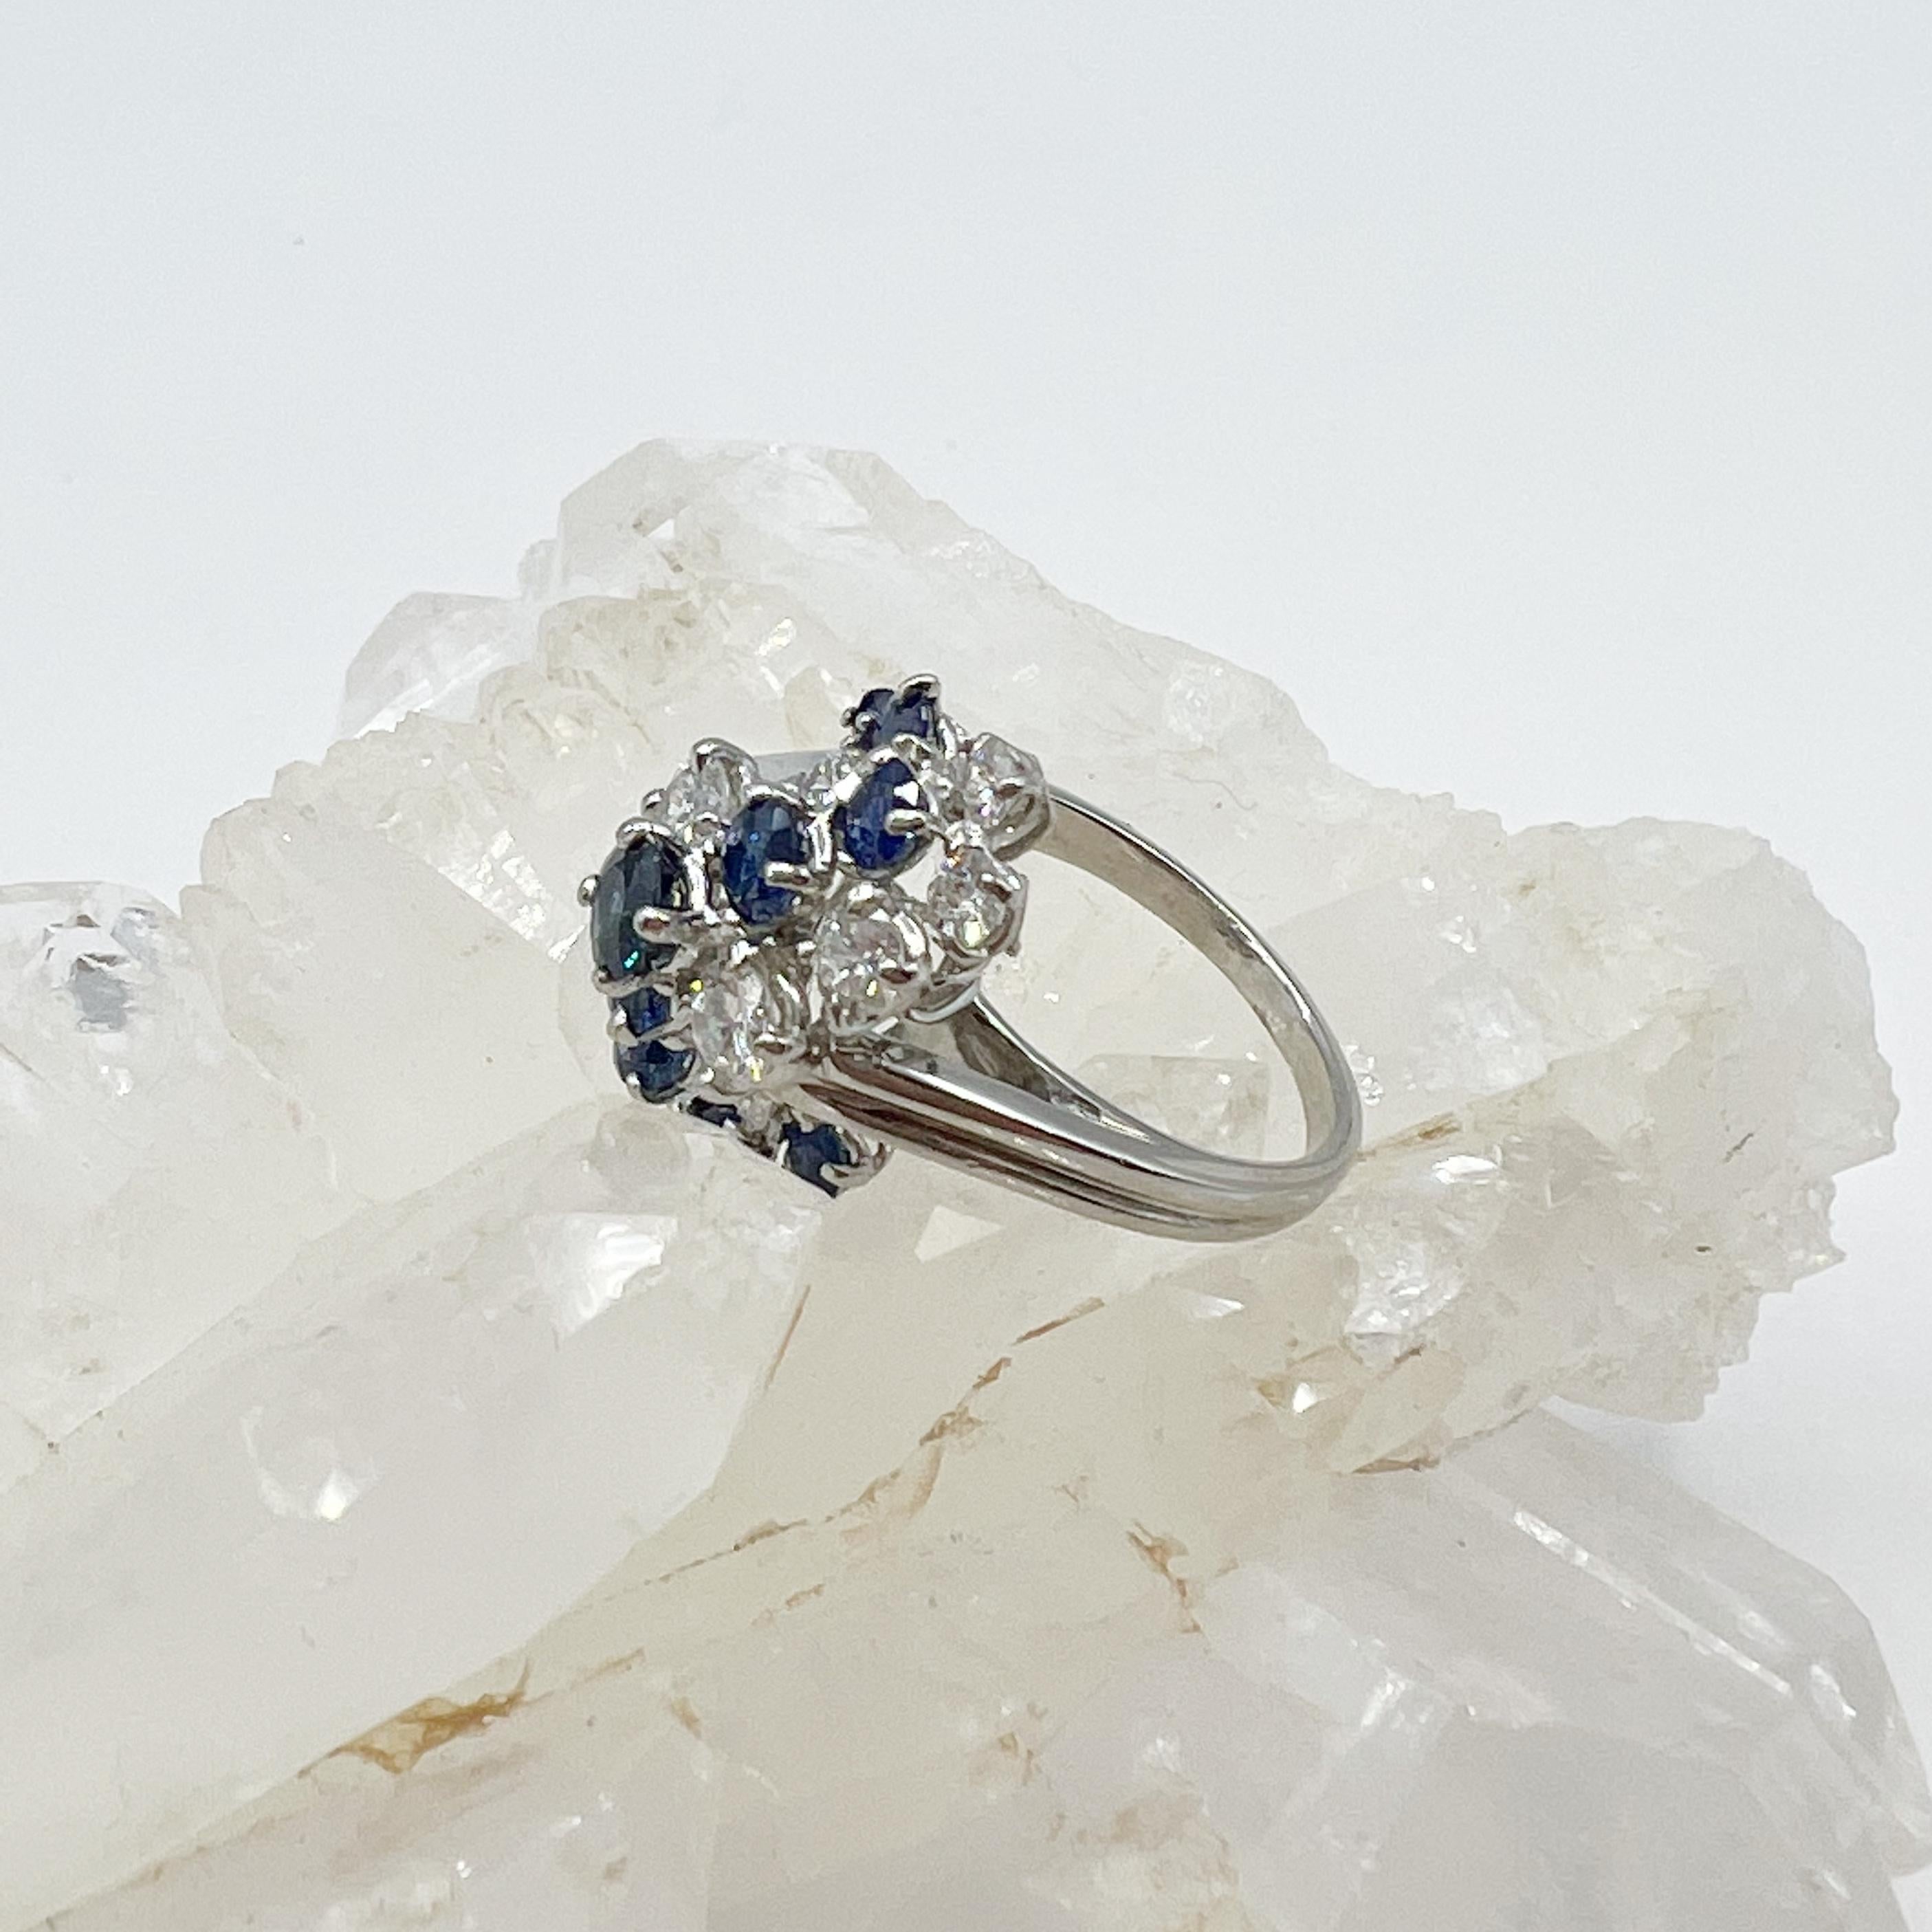 This stunner is a multitude of round faceted diamonds and sapphires creating a galaxy of sparkle. The diamonds measure approximately 1..20 total carat weight. The diamonds are F/G color and VS1/VS2 quality. The sapphires measure approximately .65